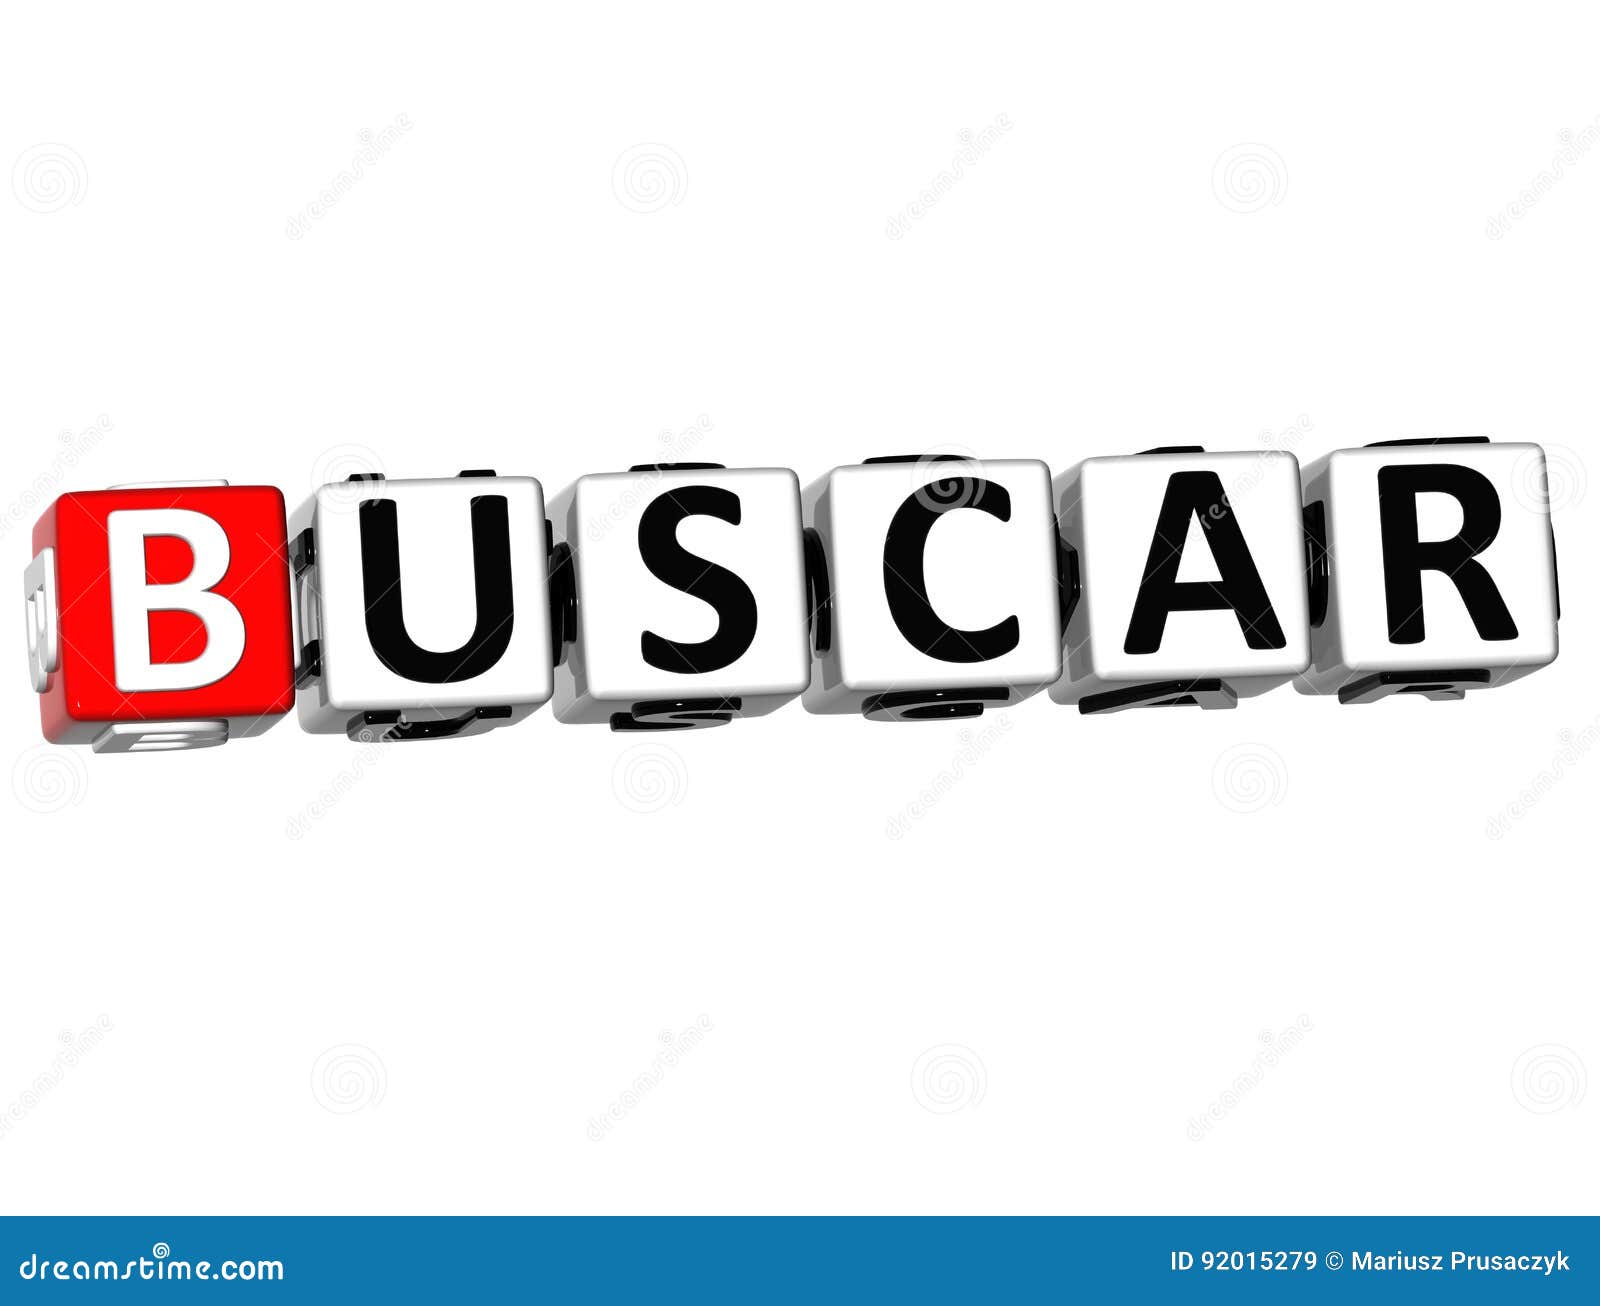 3d buscar block text on white background